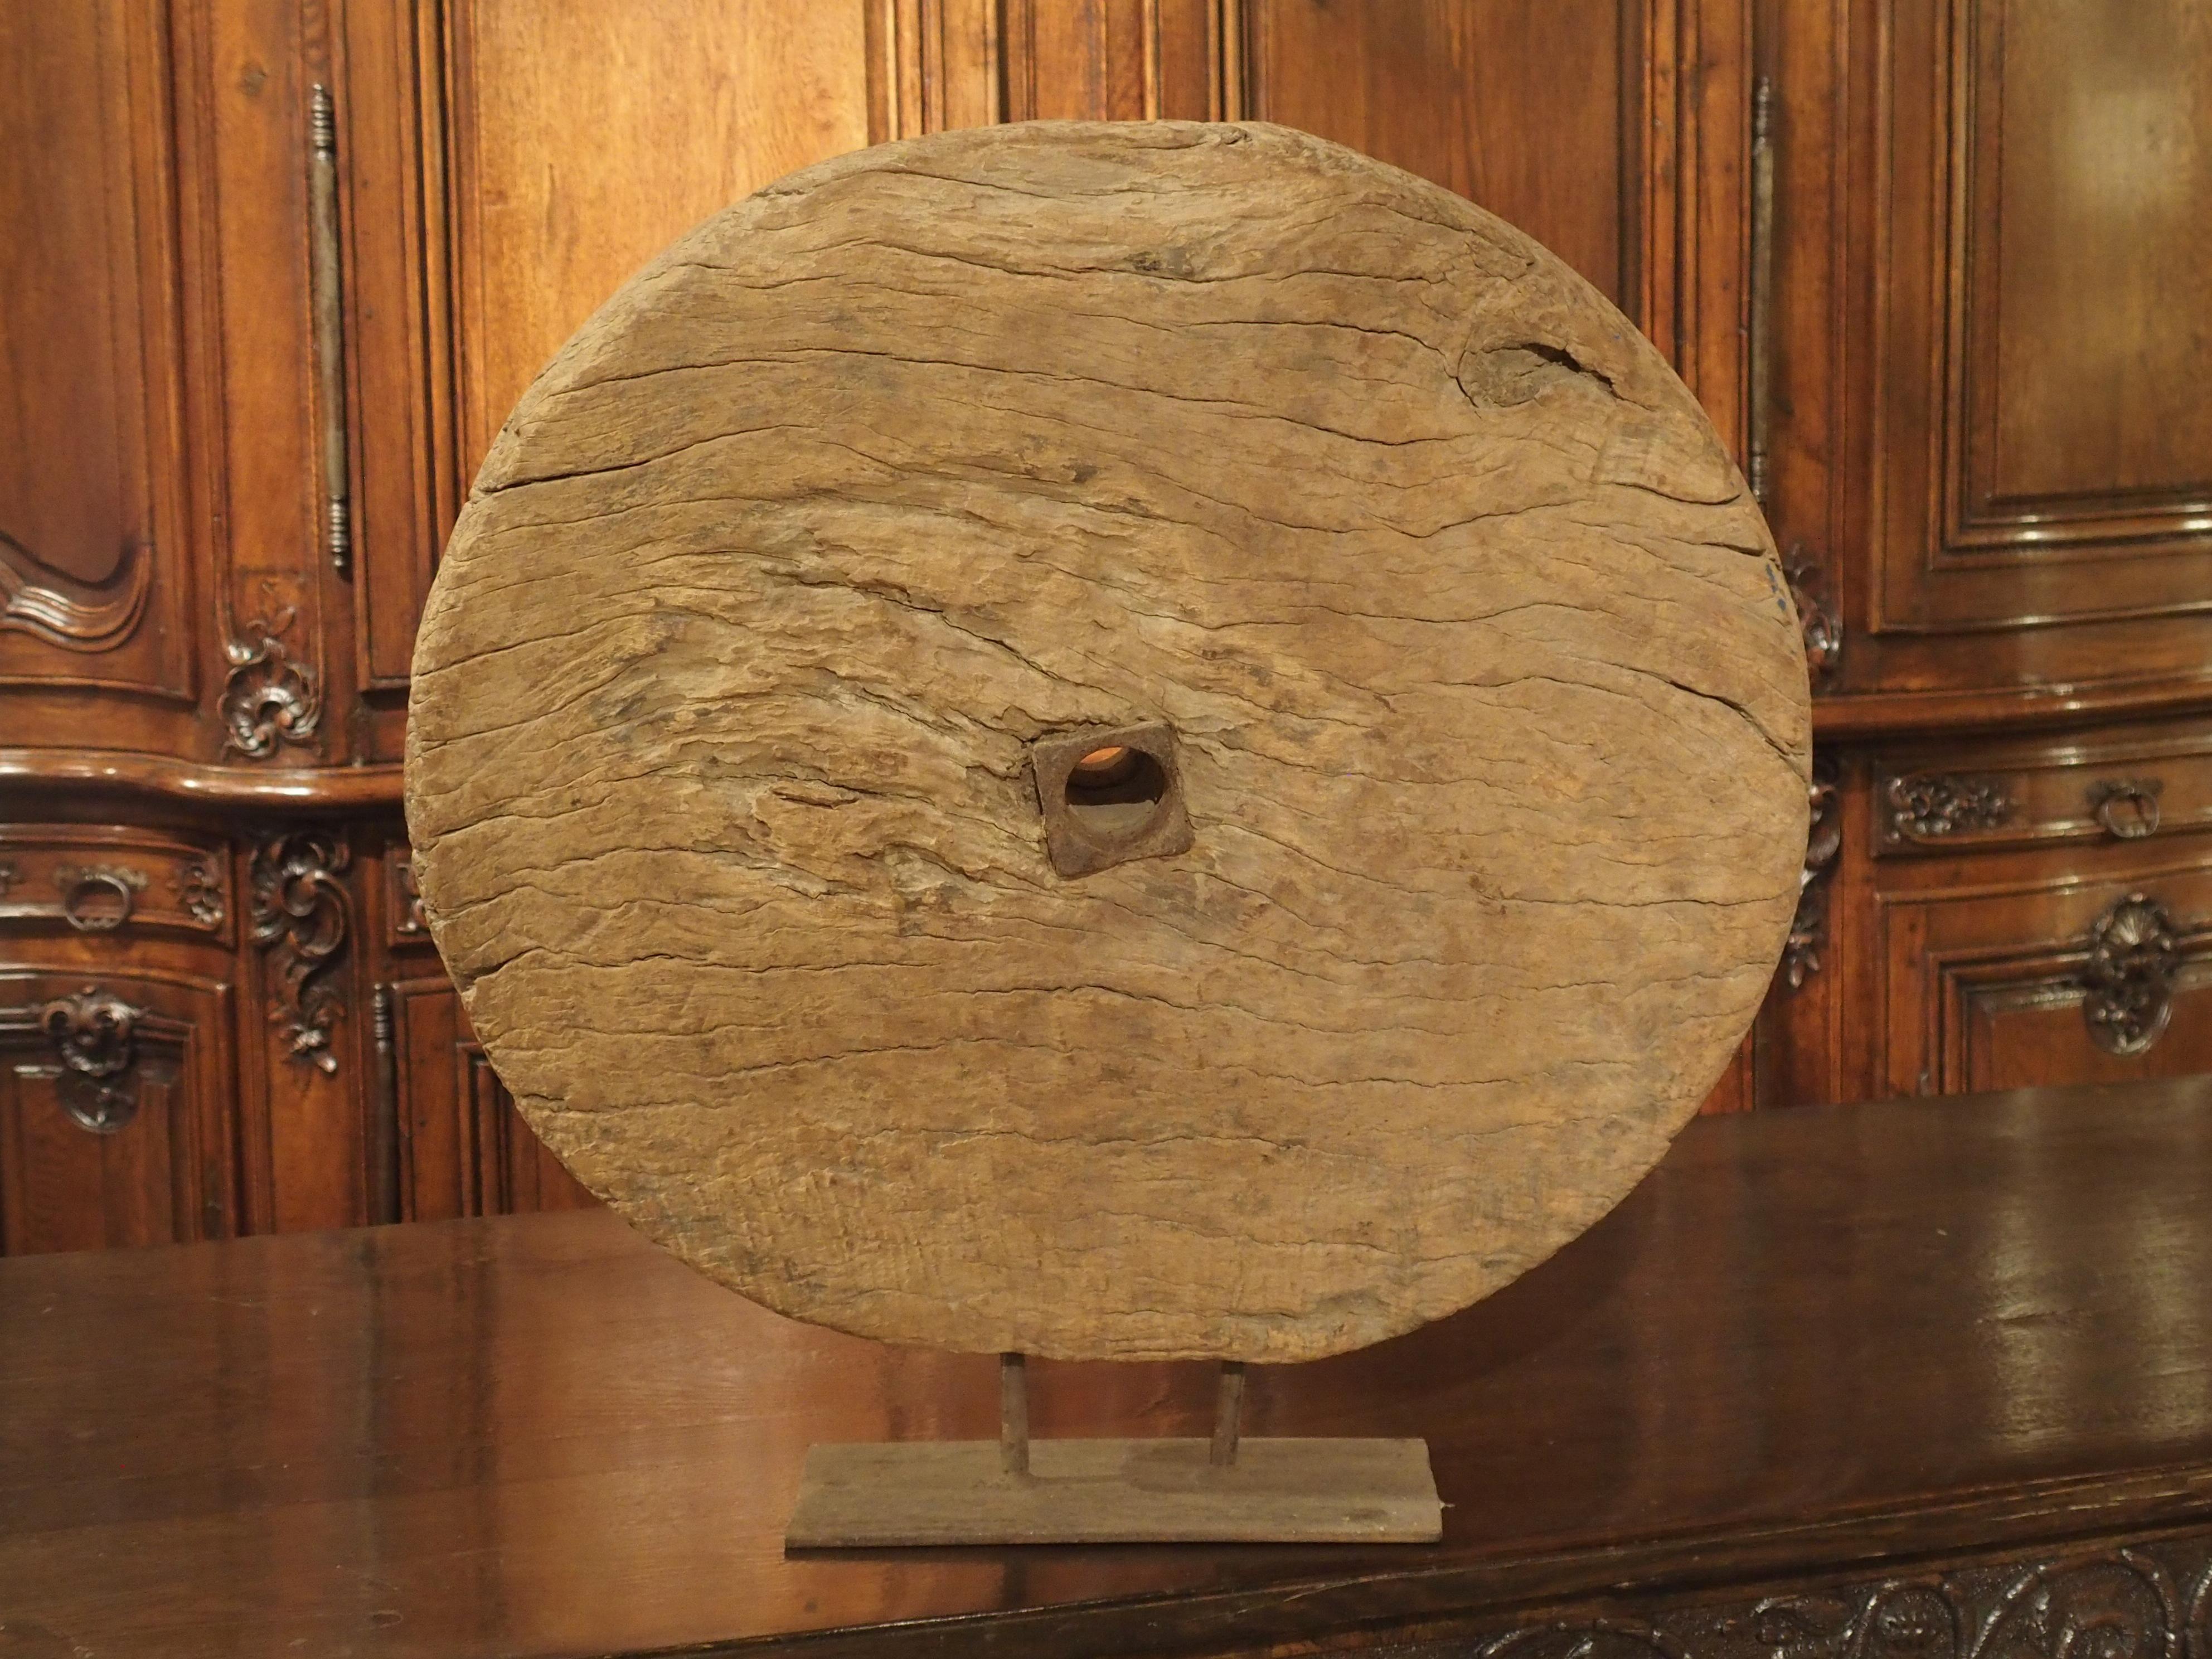 Indian Antique Mounted Wooden Work Wheel from India